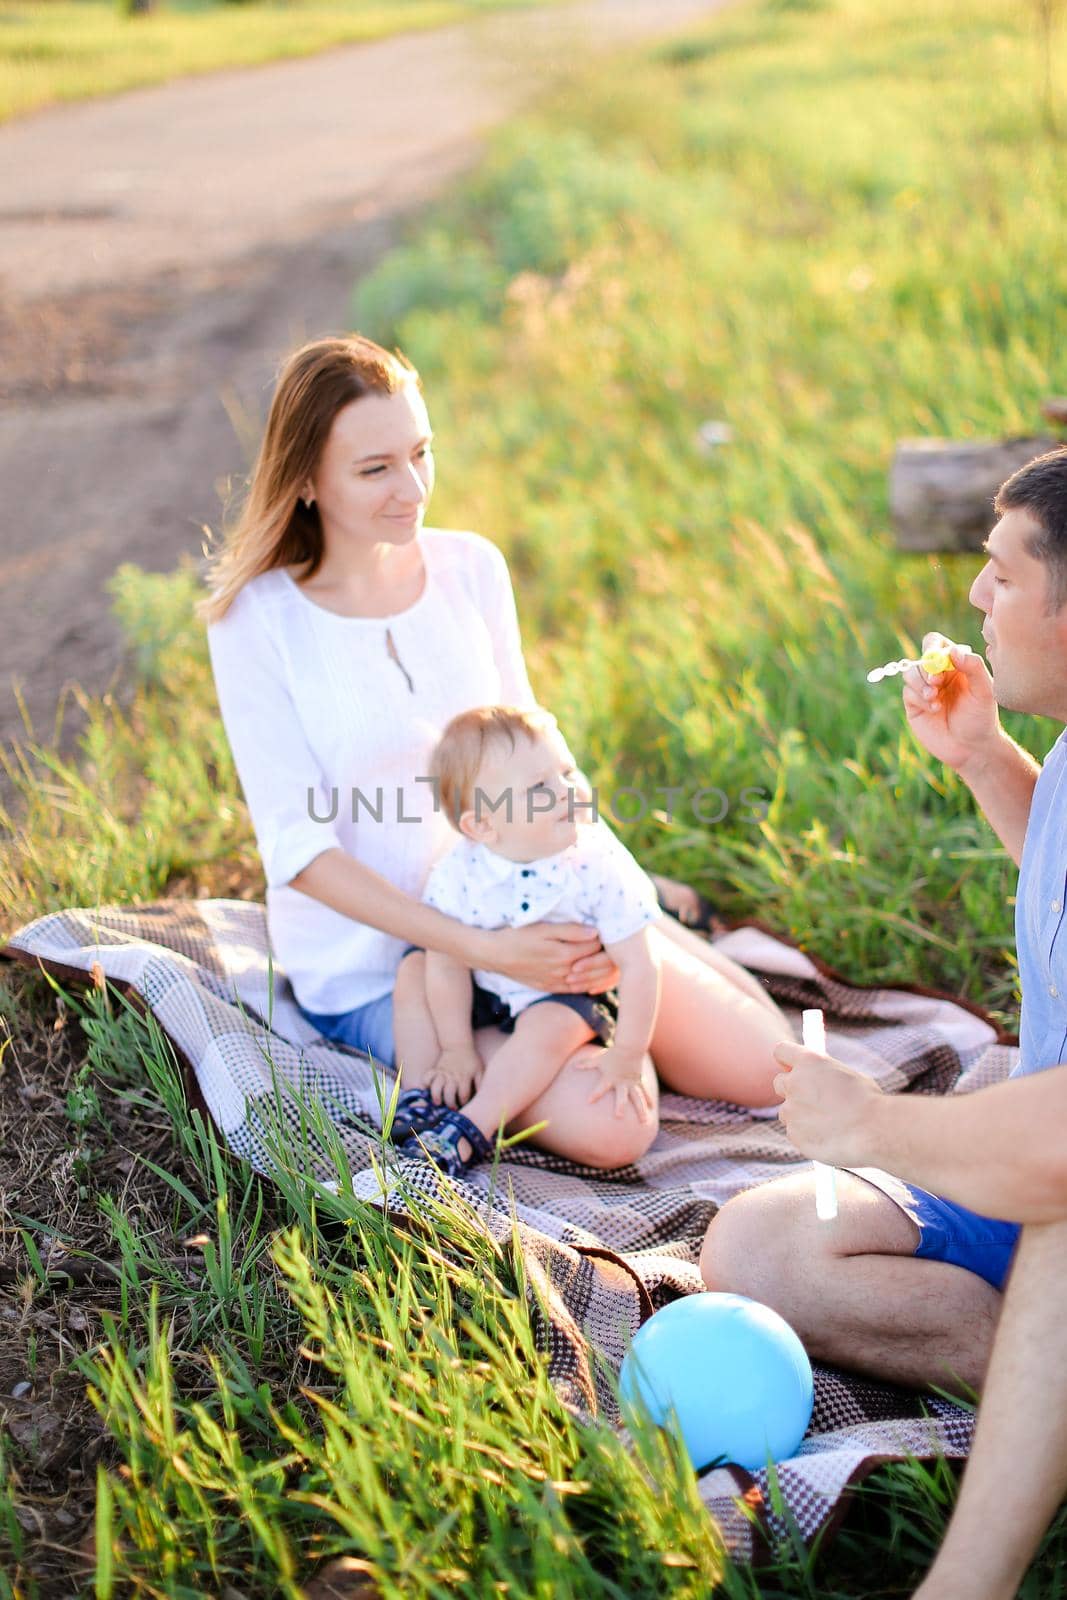 Young mother and father sittling on grass with little baby and blowing bubbles. Concept of picnic and children, parenthood and leisure time.